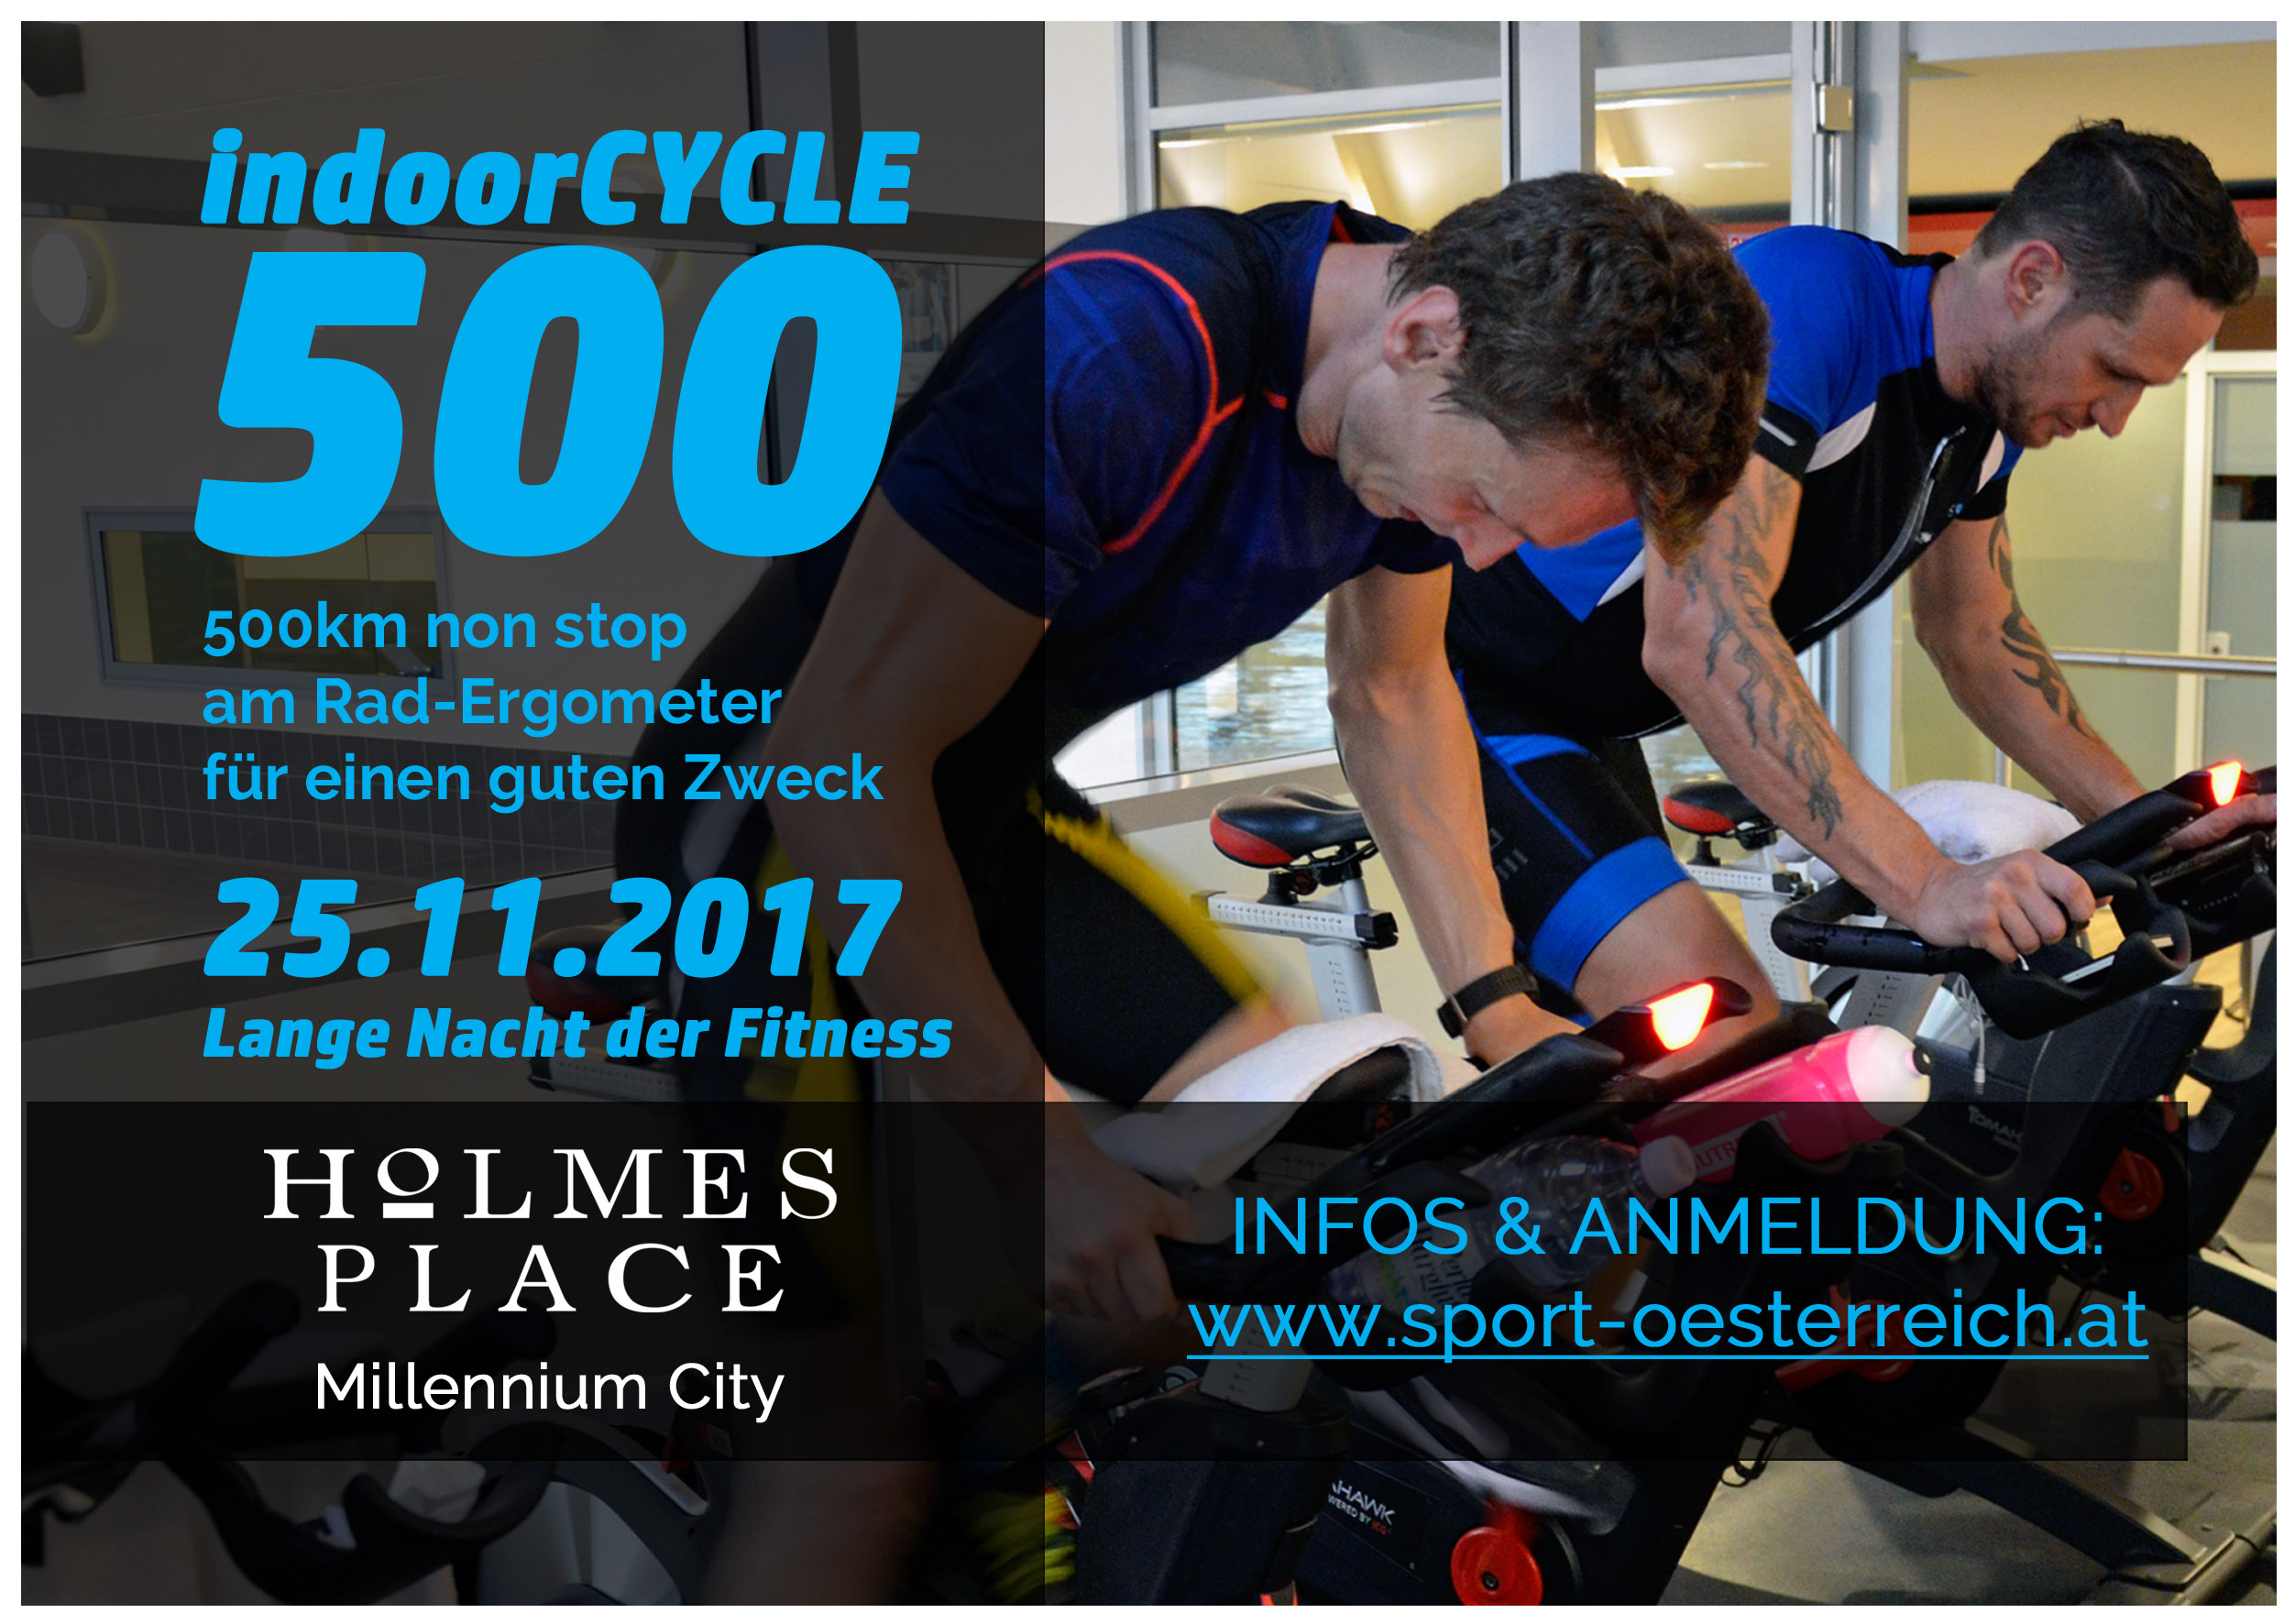 indoorCYCLE 500 by sport-oesterreich.at